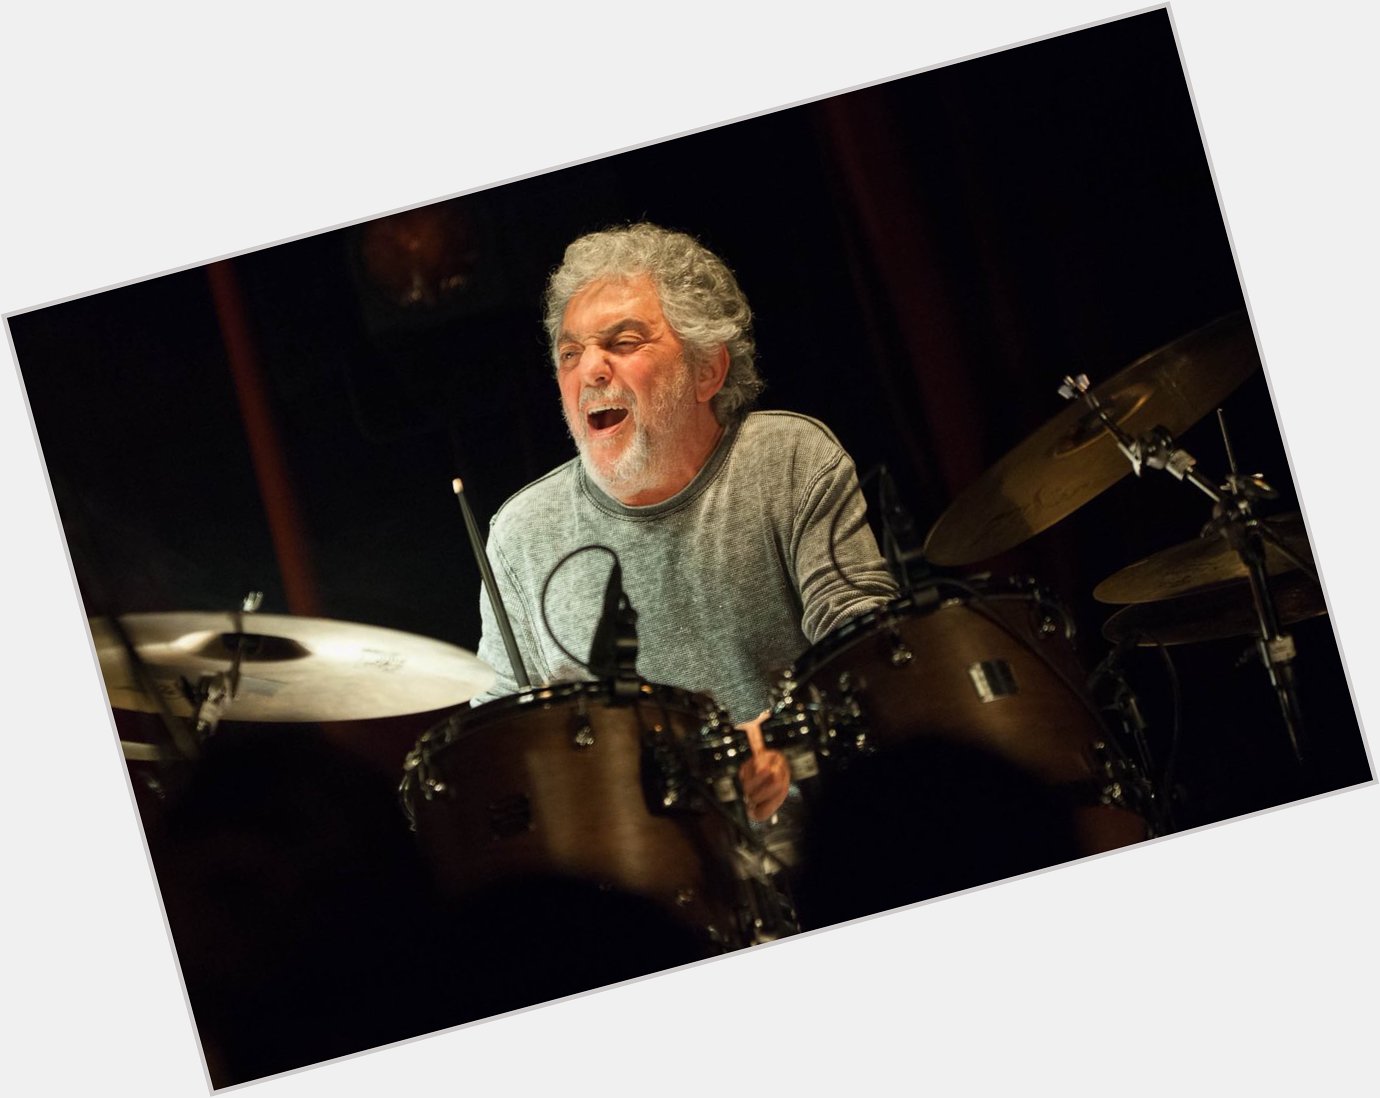 A very happy birthday to one of my favorite drummers and people....Dr. Steve Gadd. 